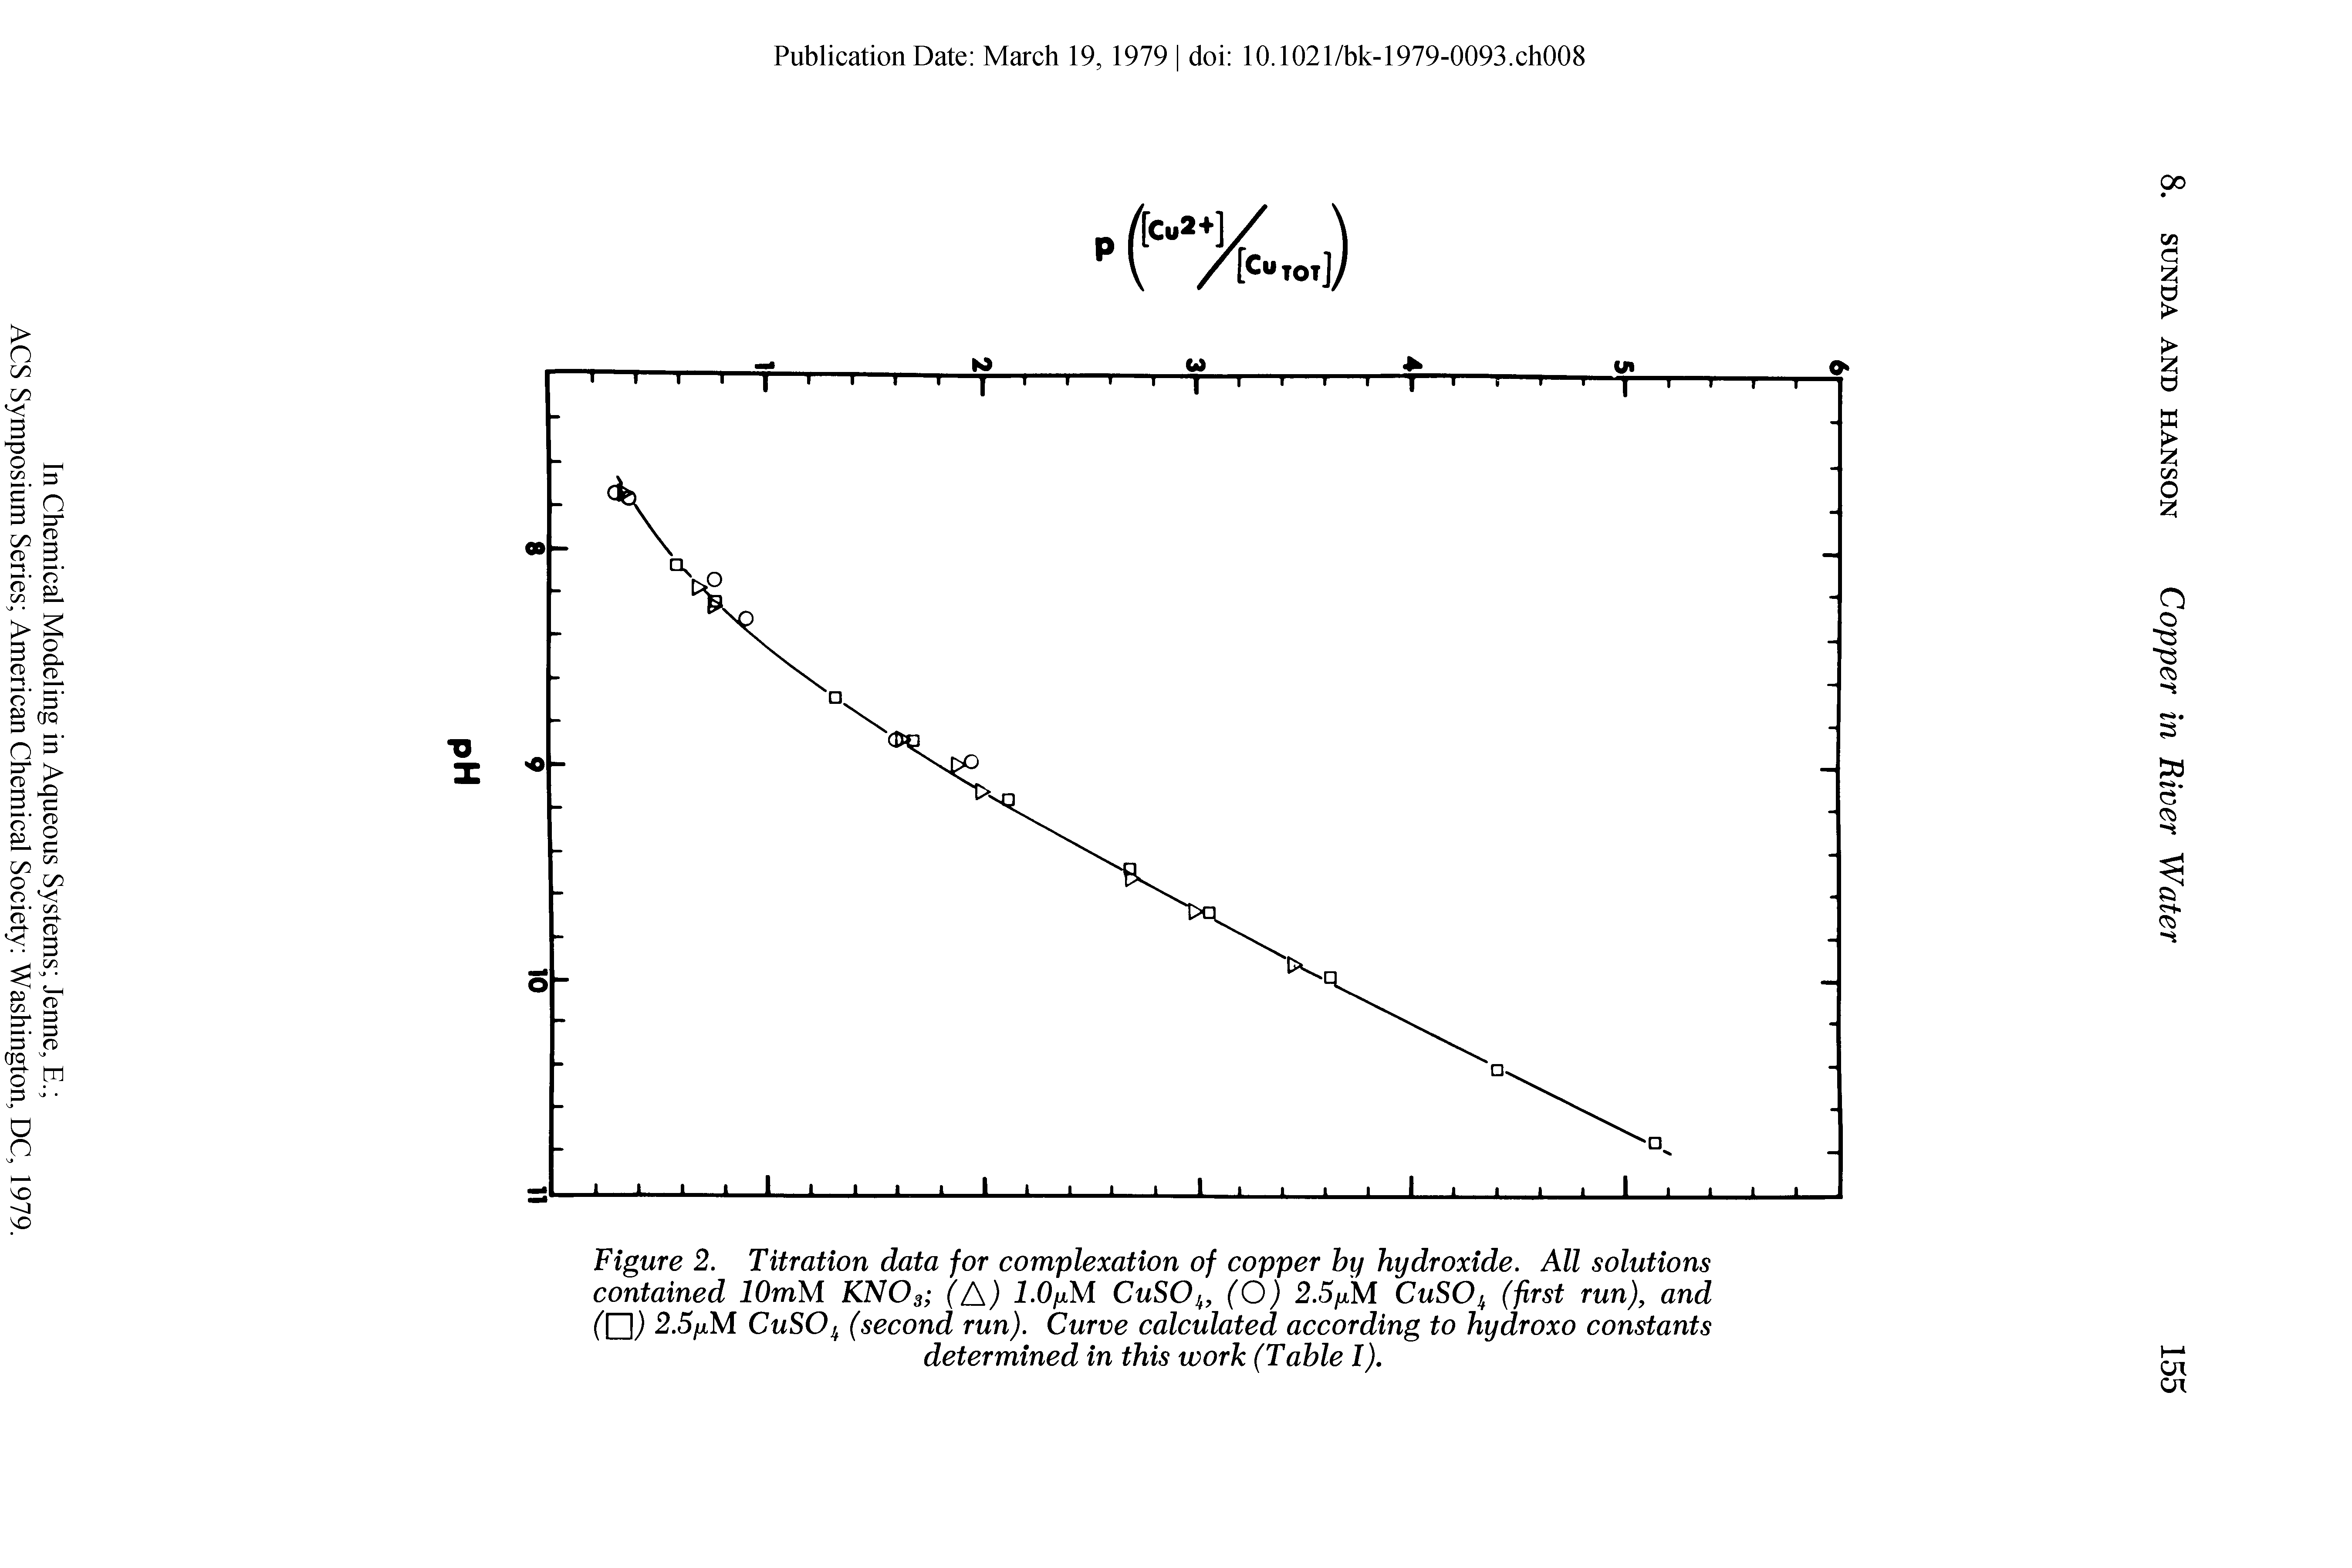 Figure 2. Titration data for complexation of copper by hydroxide. All solutions contained iOmM KNO3 (A) i.O/xM CuSOj, (O) 2.5/xM CuSO (first run), and 2.5/xM CuSO (second run). Curve calculated according to hydroxo constants determined in this work (Table I).